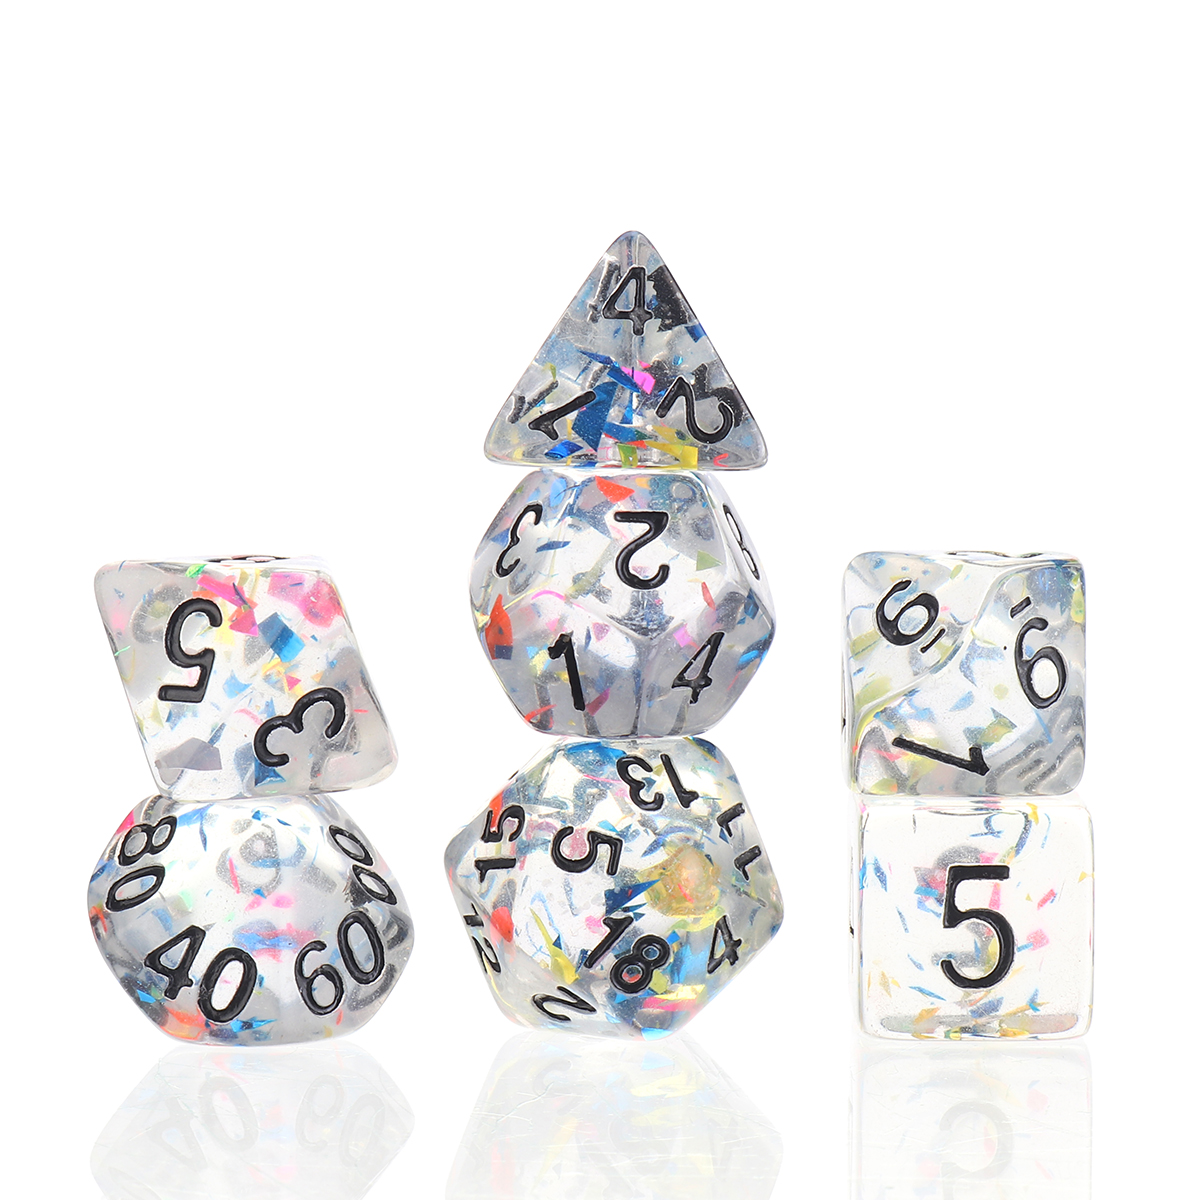 Find 7Pcs Galaxy Polyhedral Dice Resin Mirror Dices Set Role Playing Board Party Table Game Gift for Sale on Gipsybee.com with cryptocurrencies